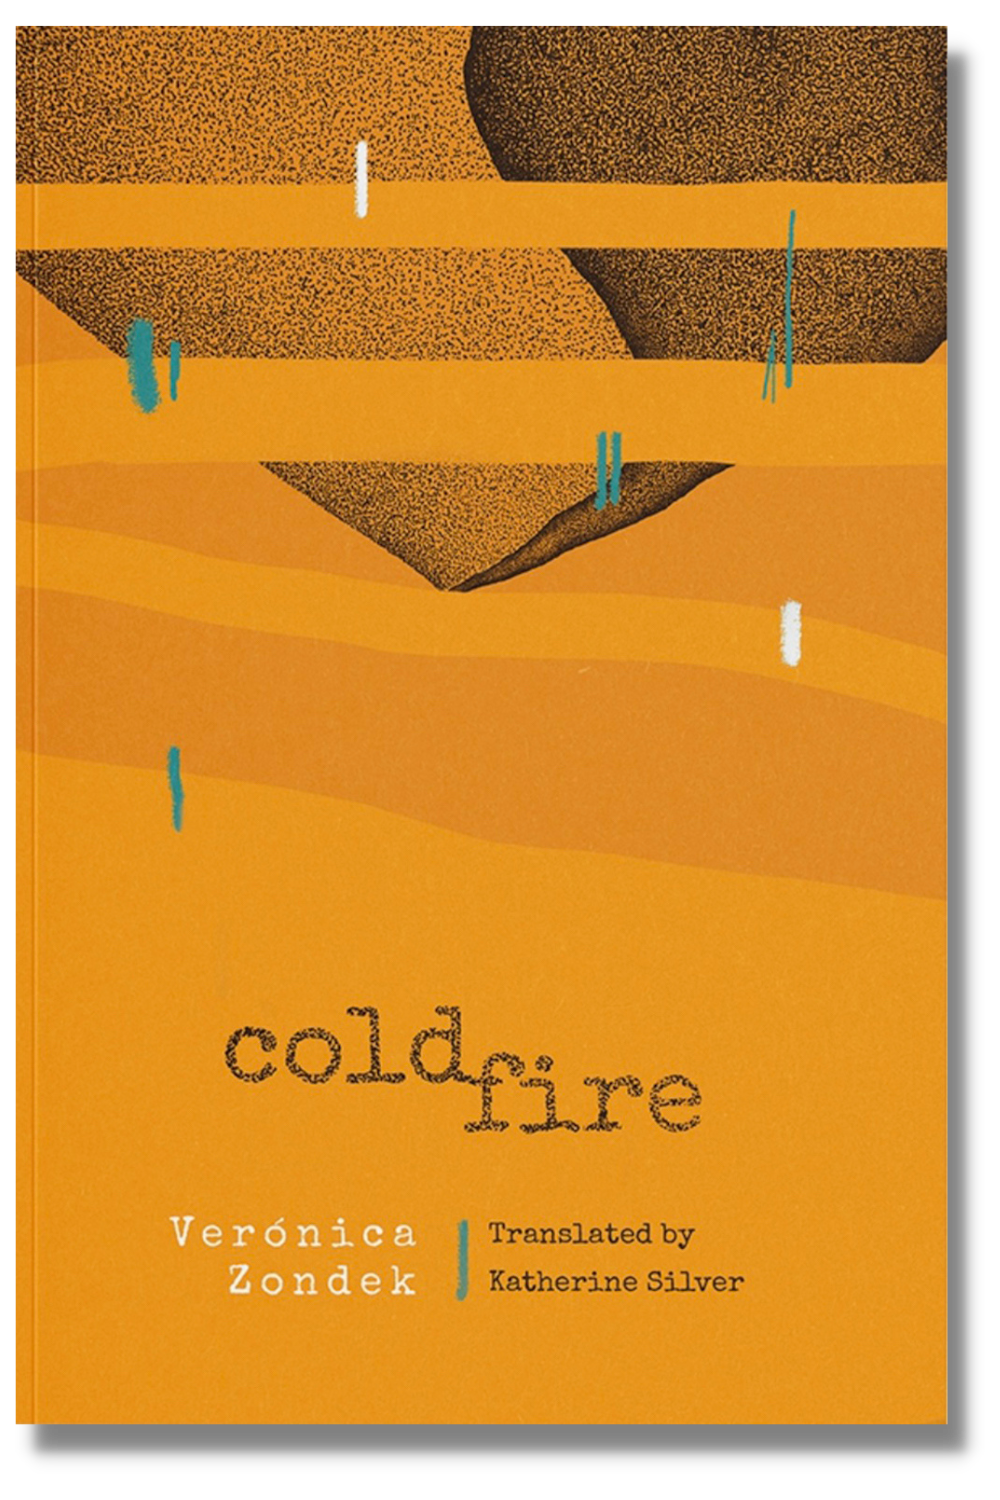 The cover of "Cold Fire"